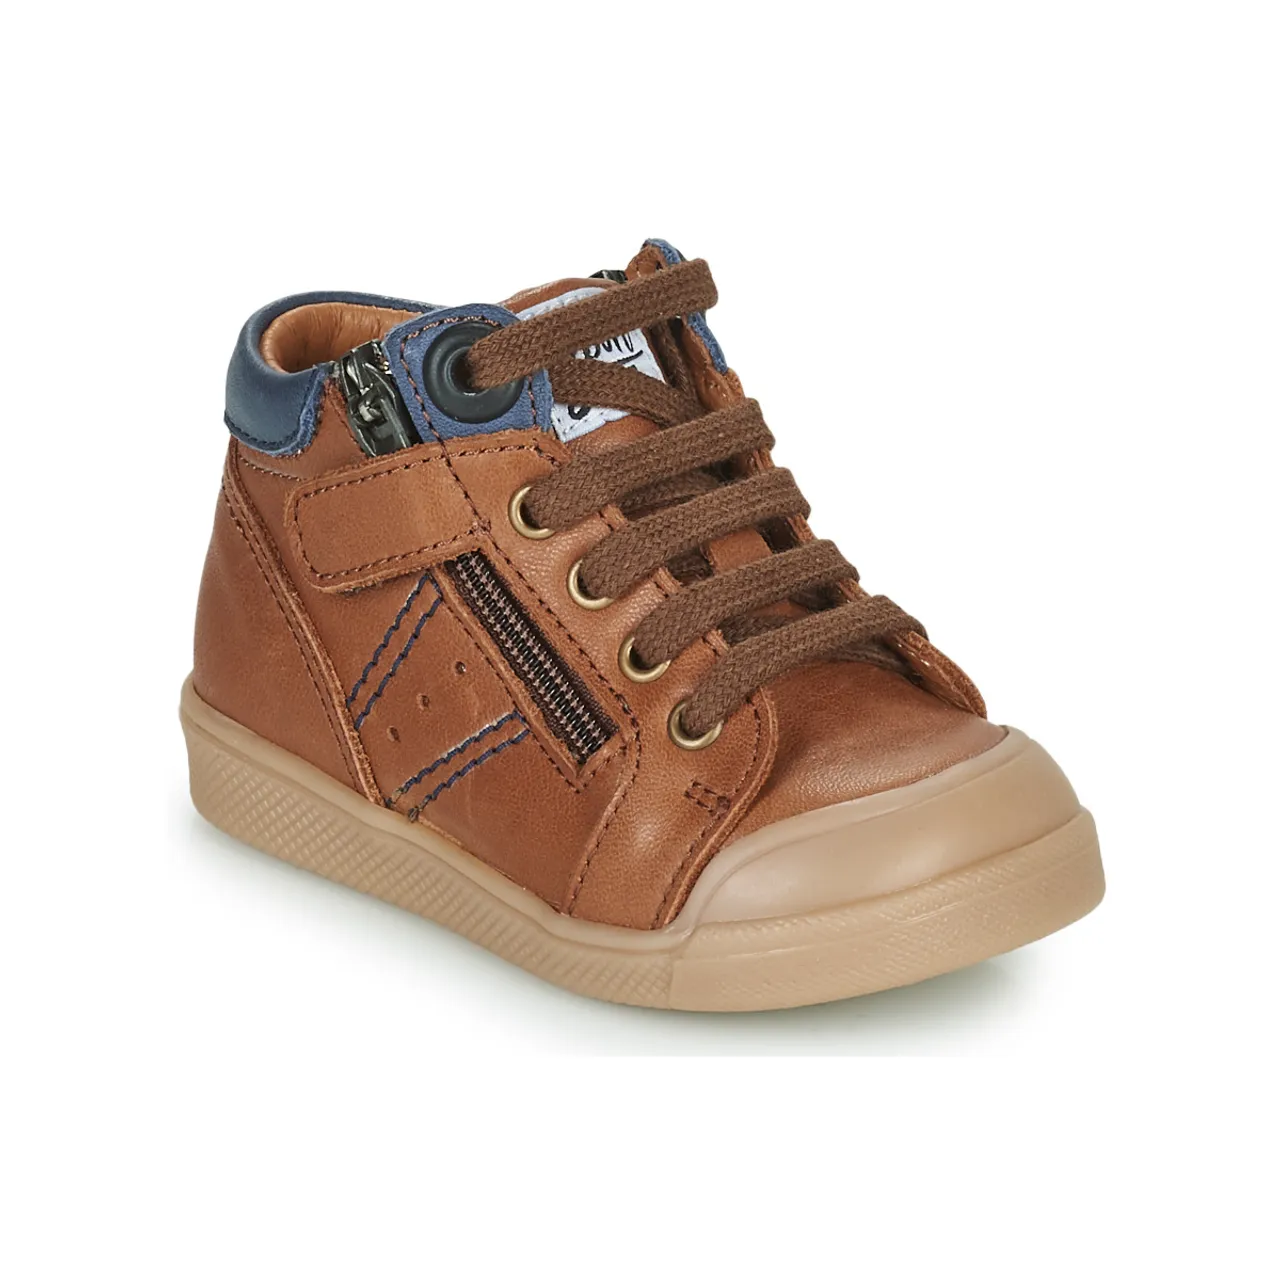 GBB  ANATOLE  boys's Children's Shoes (High-top Trainers) in Brown